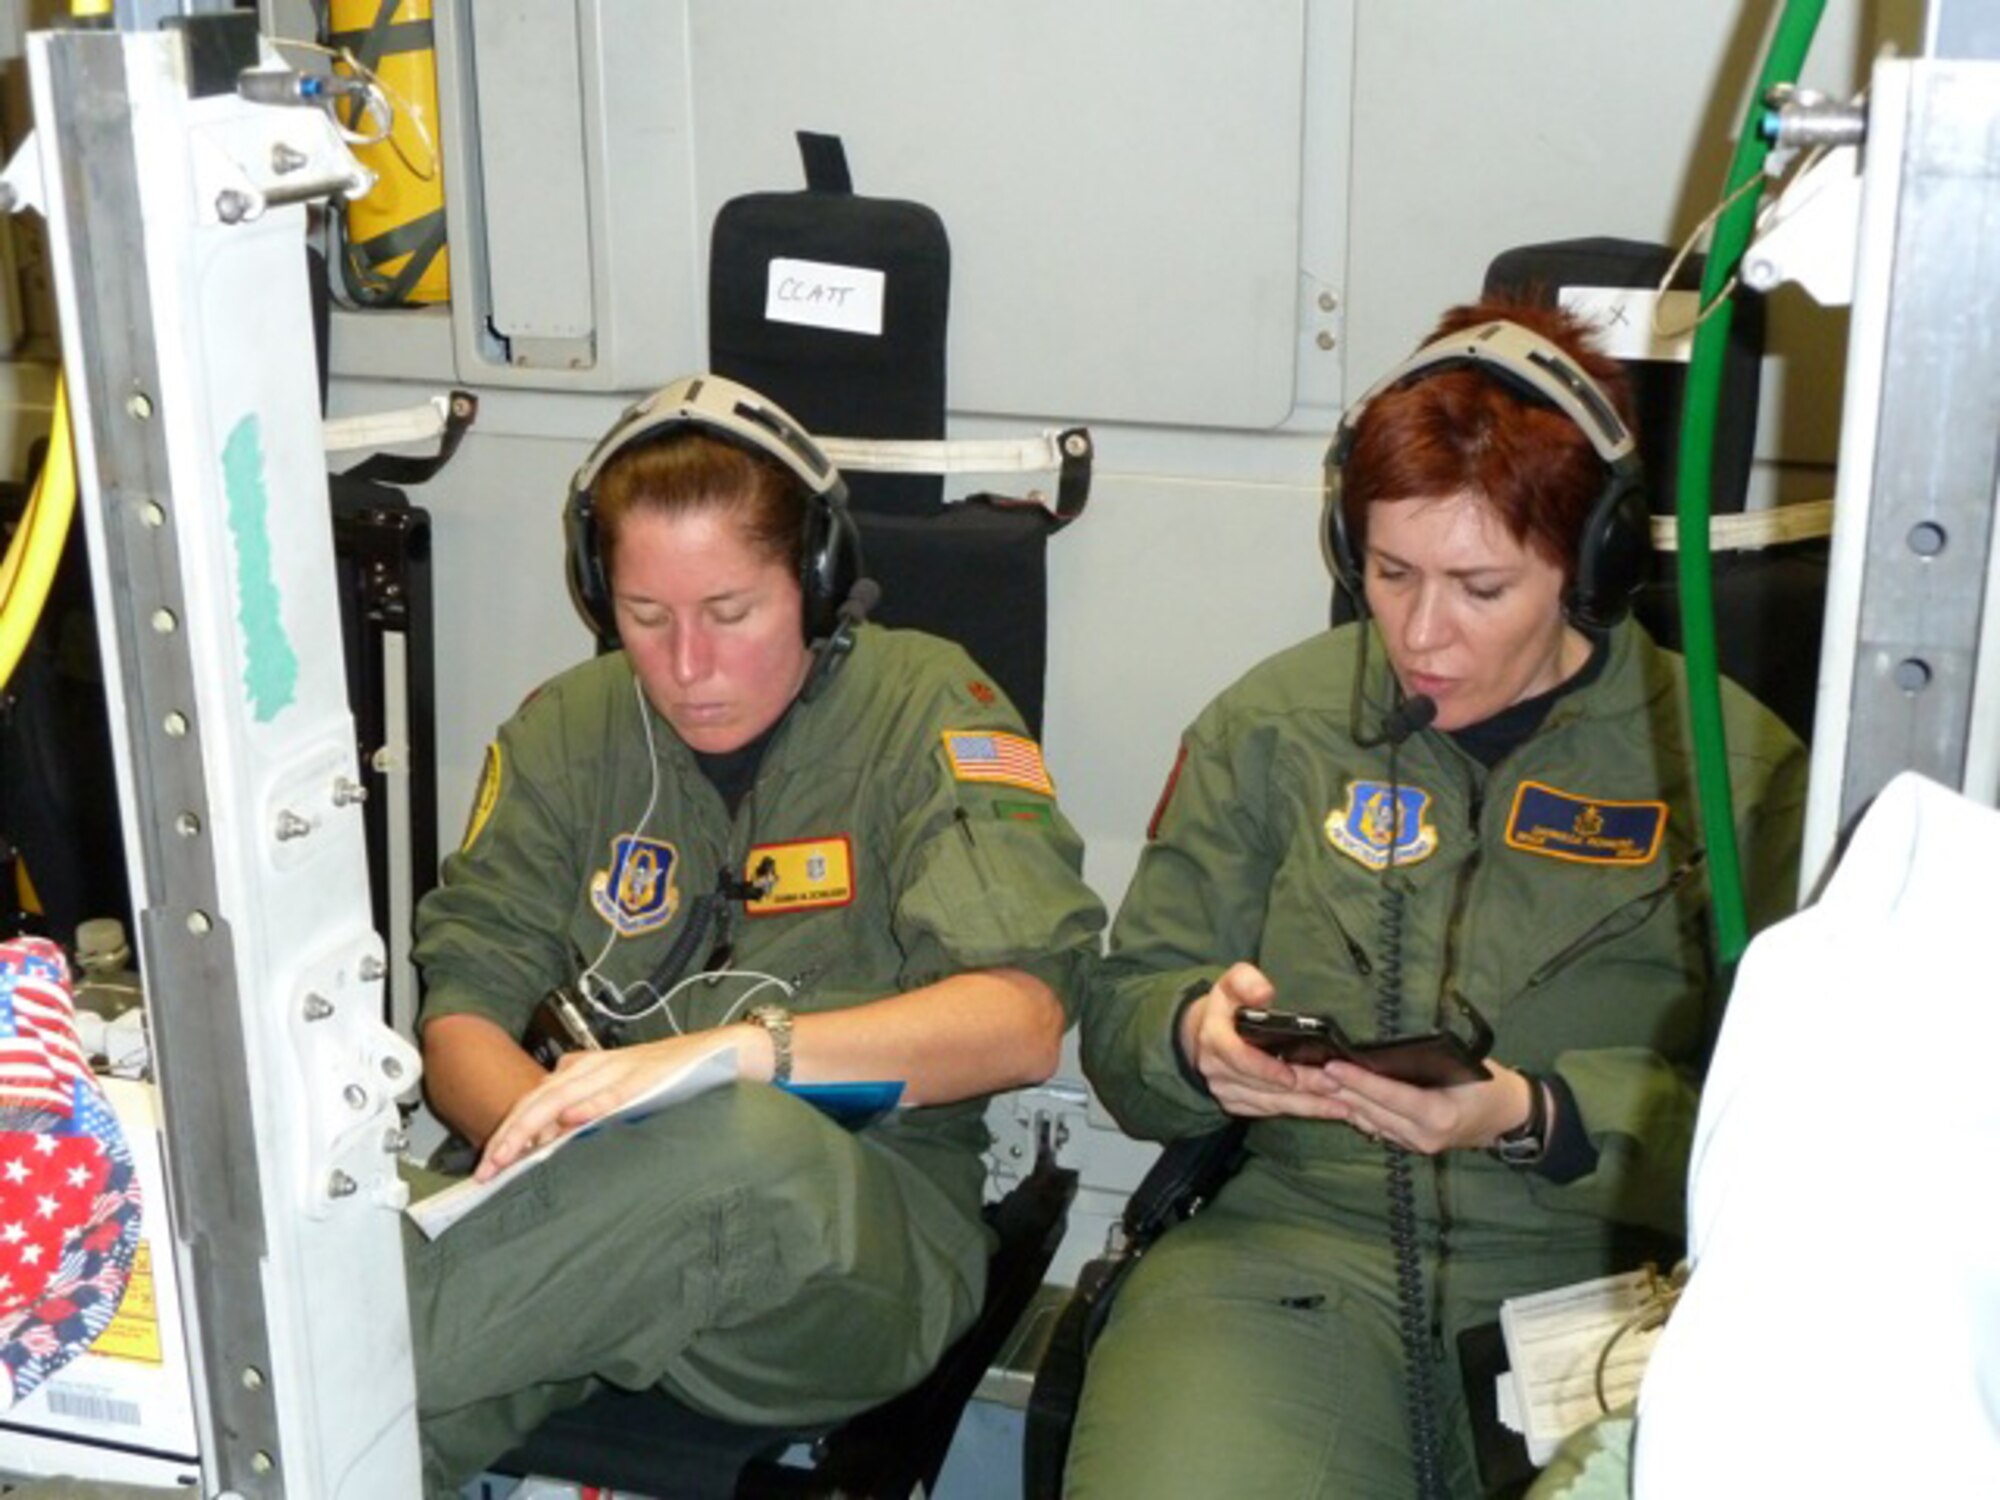 Critical Care Nurse, Maj. Dianna Schulckers from the 920th ASTS at Patrick AFB, Fla. and Respiratory Therapist Master Sgt. Danielle Romero from the 934th ASTS in Minneapolis during an aeromedical evacuation from Germany to the United States aboard a C-17. (Air Force Photo/315th Airlift Wing)
